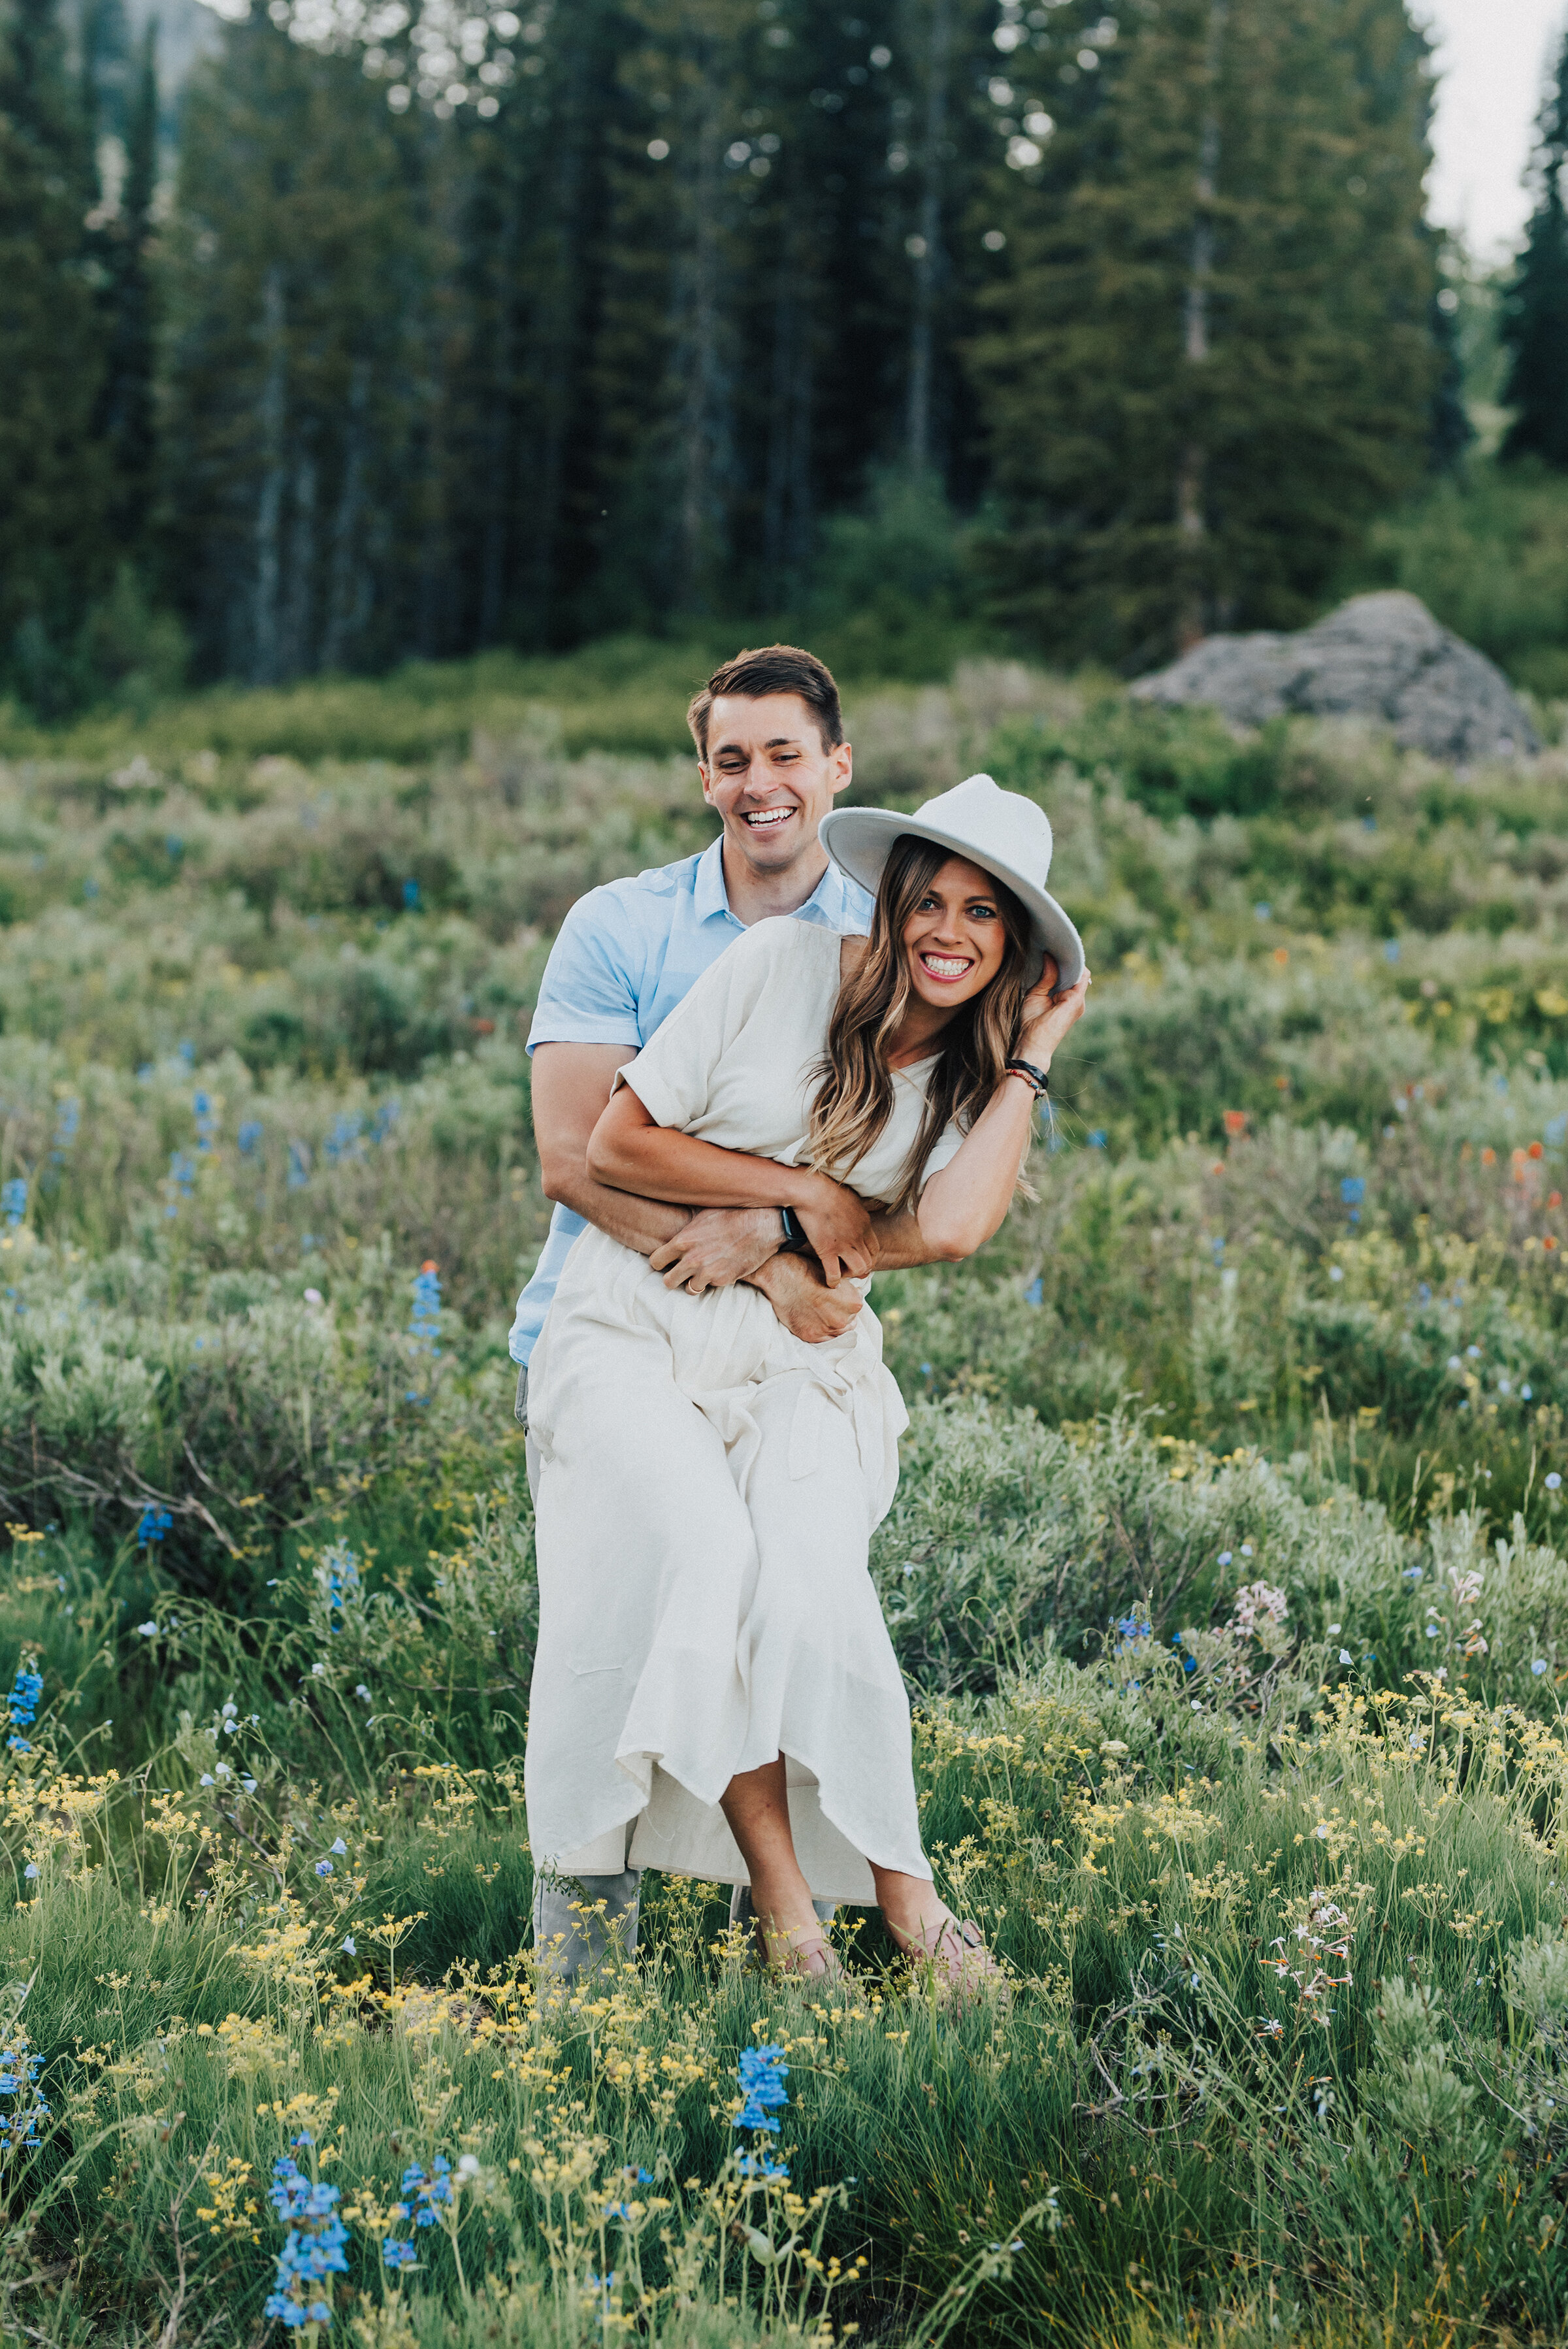  Playful couple during this fun family session up Logan canyon at Tony Grove. Logan Utah family photographer Kristi Alyse photography Tony Grove forest nature photos Logan canyon light blue family photos wild flowers grand parents children parents spouses reunited dreamy scenic photo shoot #kristialysephotography #utahphotographer #familyphotography #logancanyon #familyphotos #forest #wildflowers #northernutah #familyportraits #family 